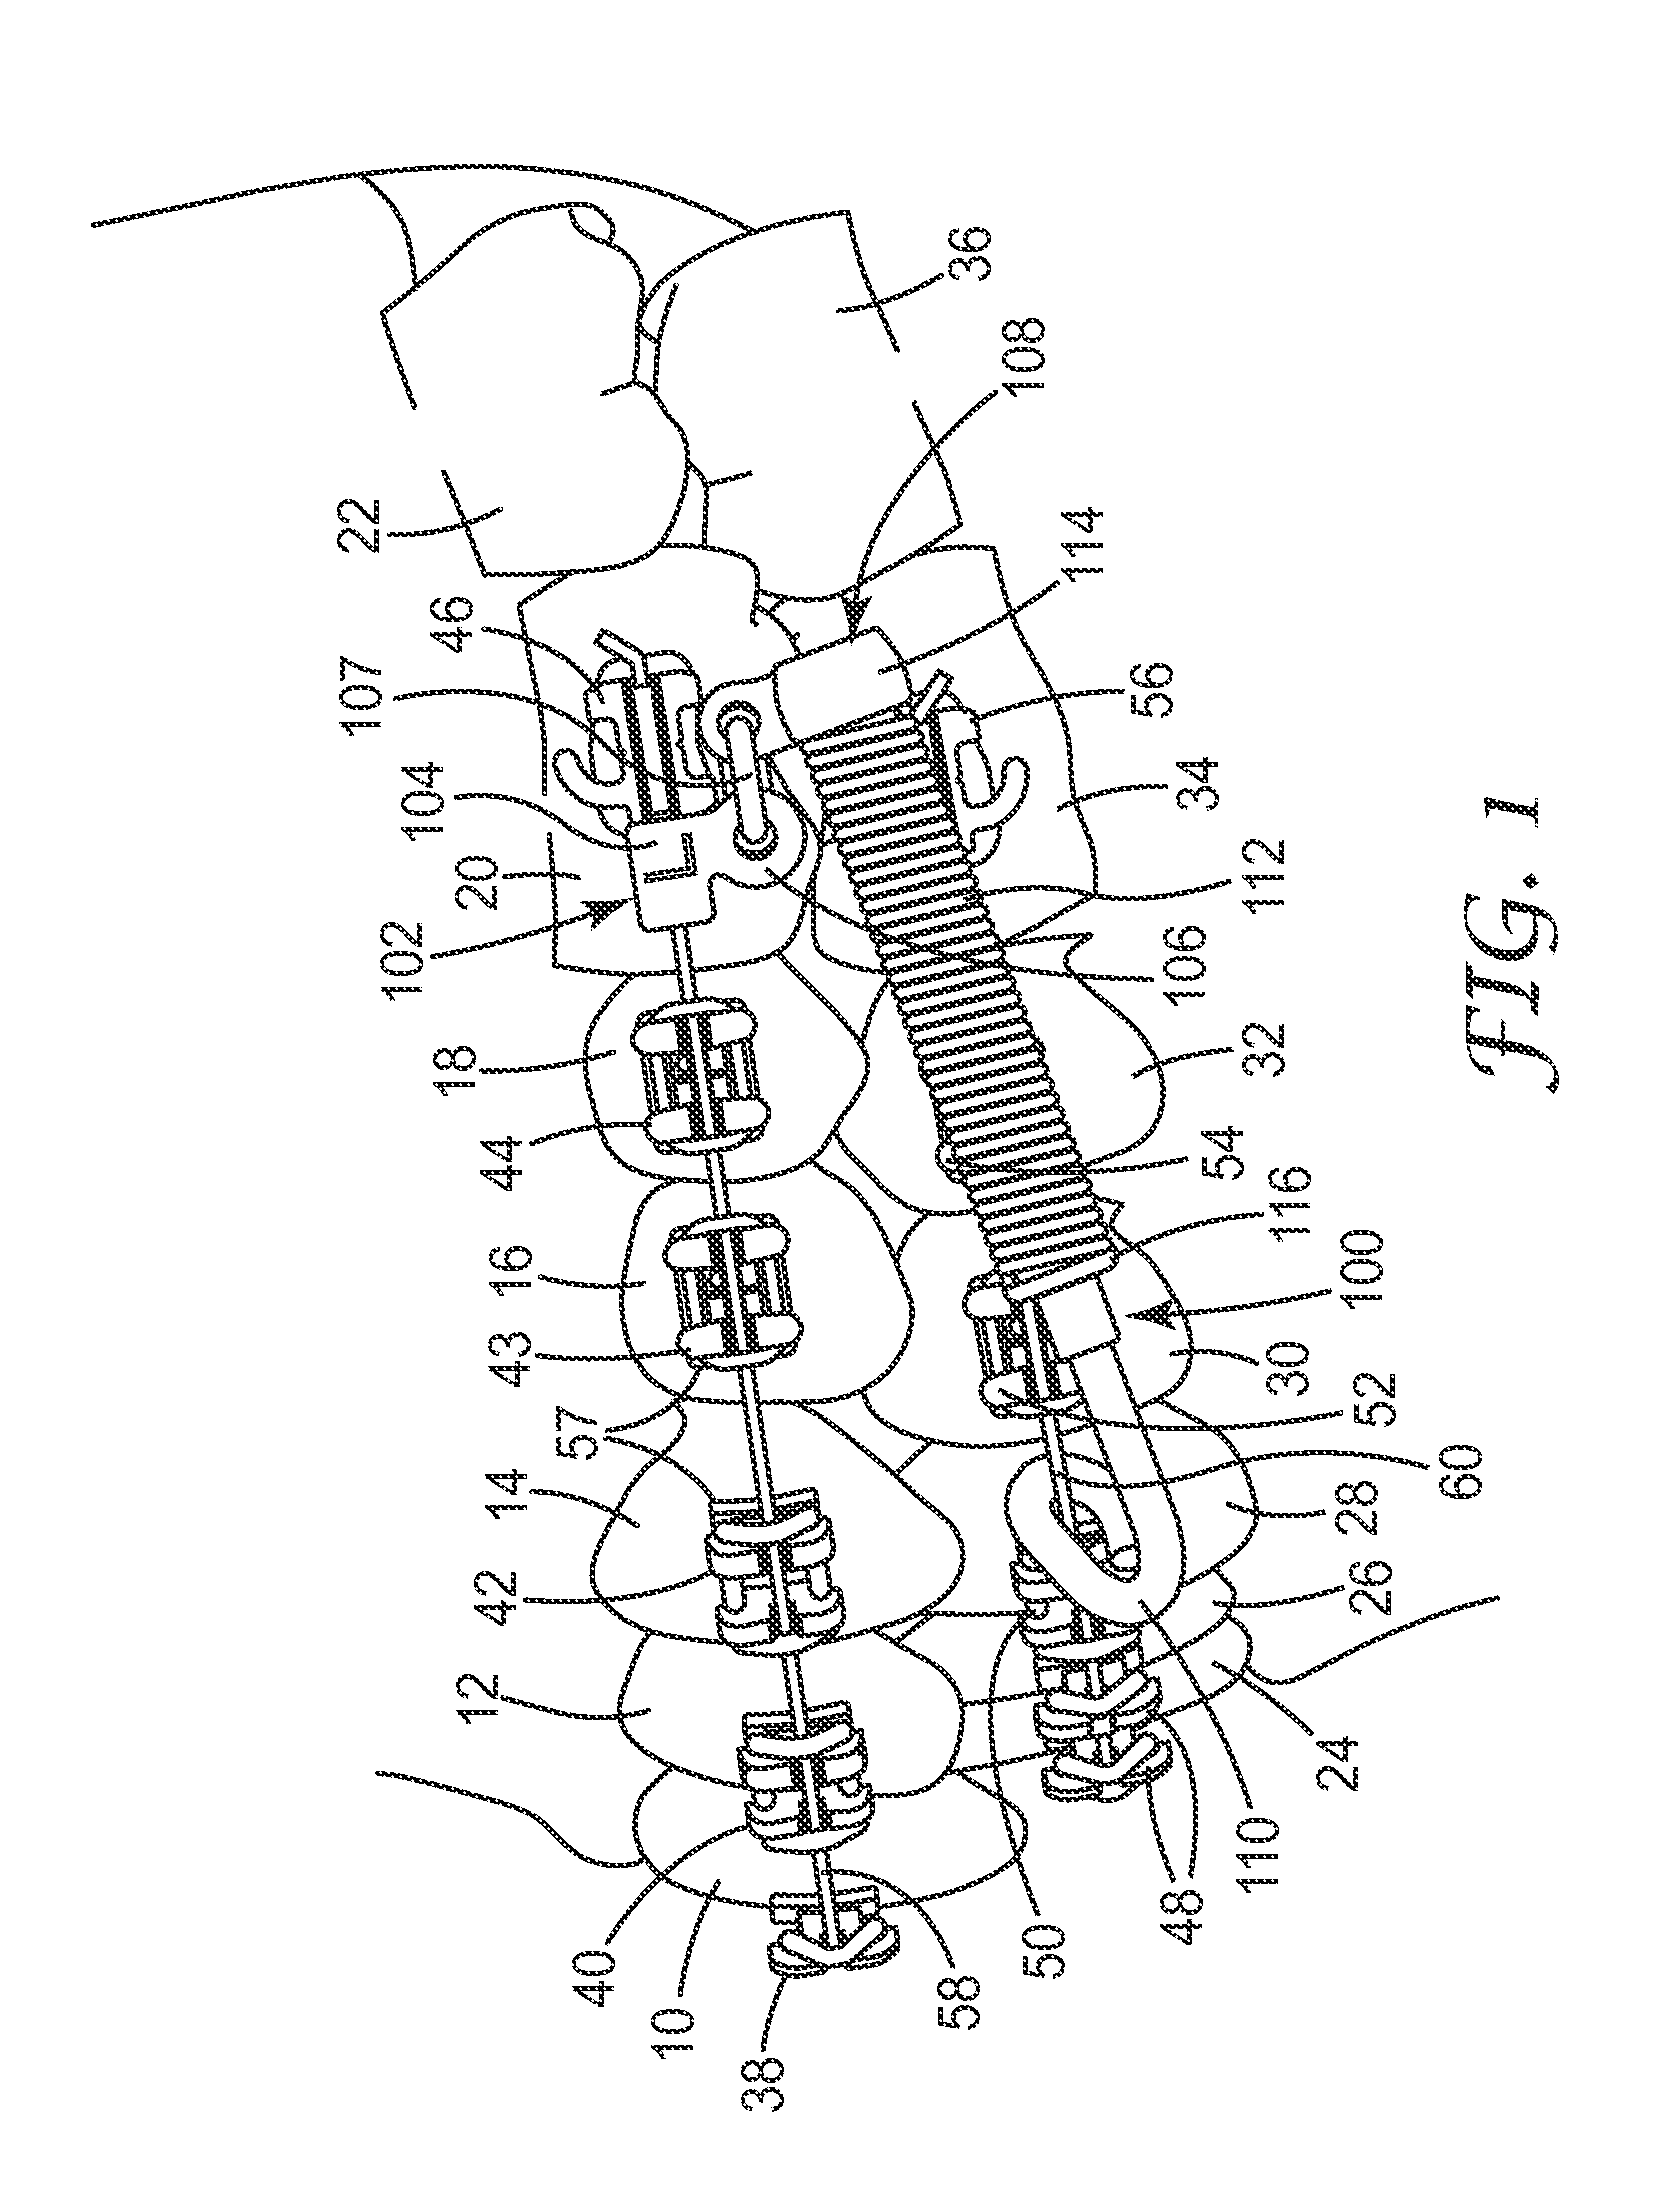 Orthodontic connector providing controlled engagement with an orthodontic wire